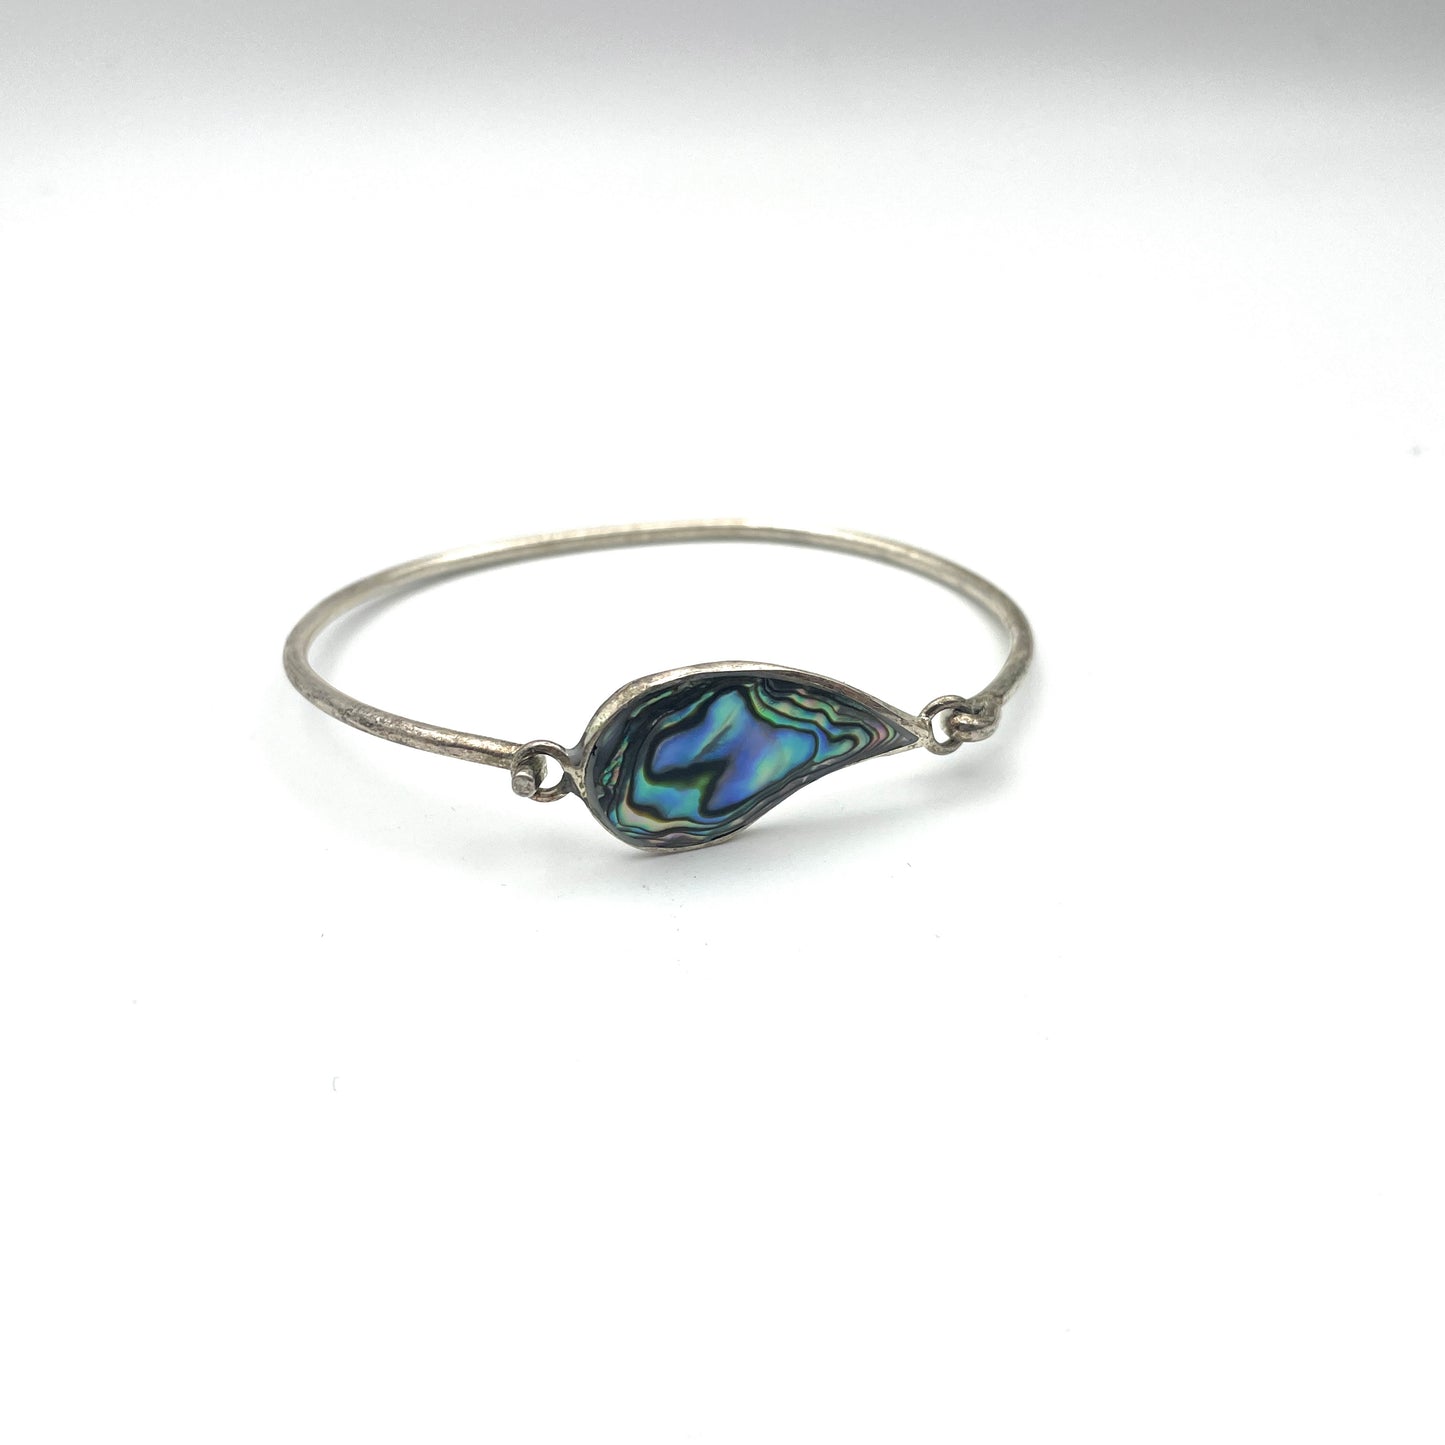 Vintage Sterling Bracelet with Abalone Clasp